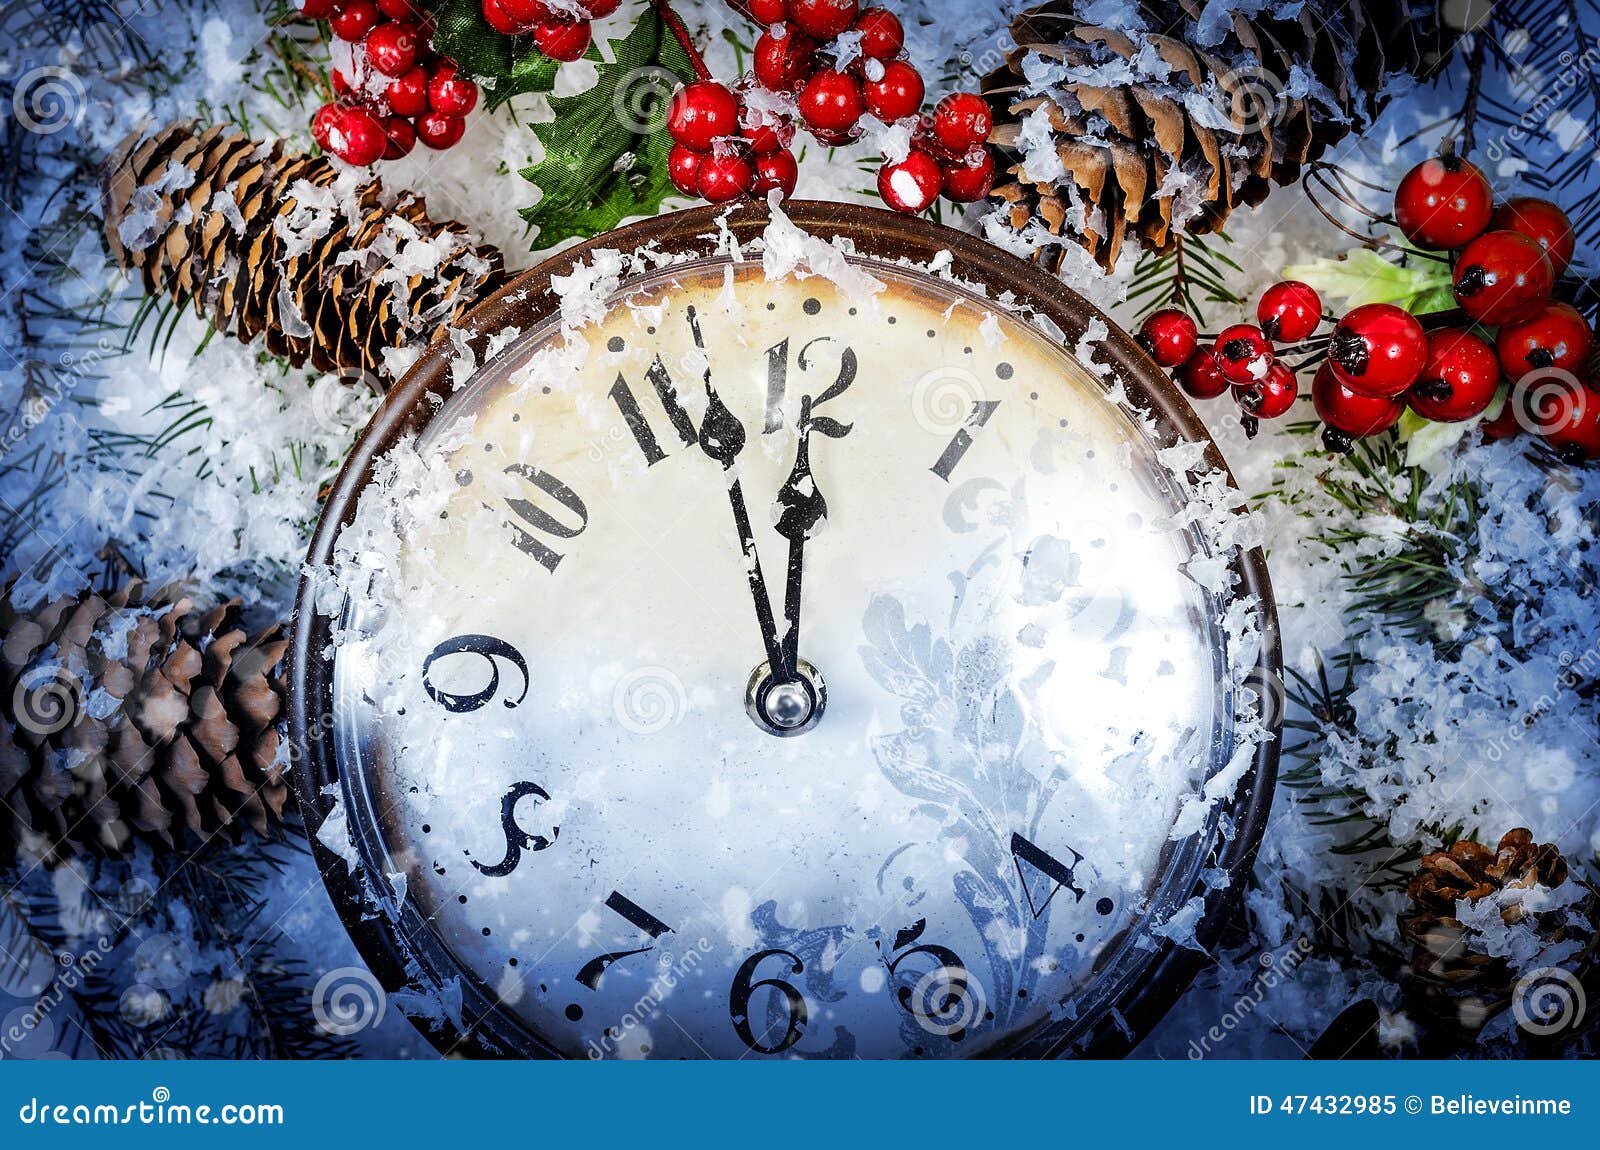 Christmas Eve And New Years At Midnight Stock Image - Image of christmas, clock: 47432985